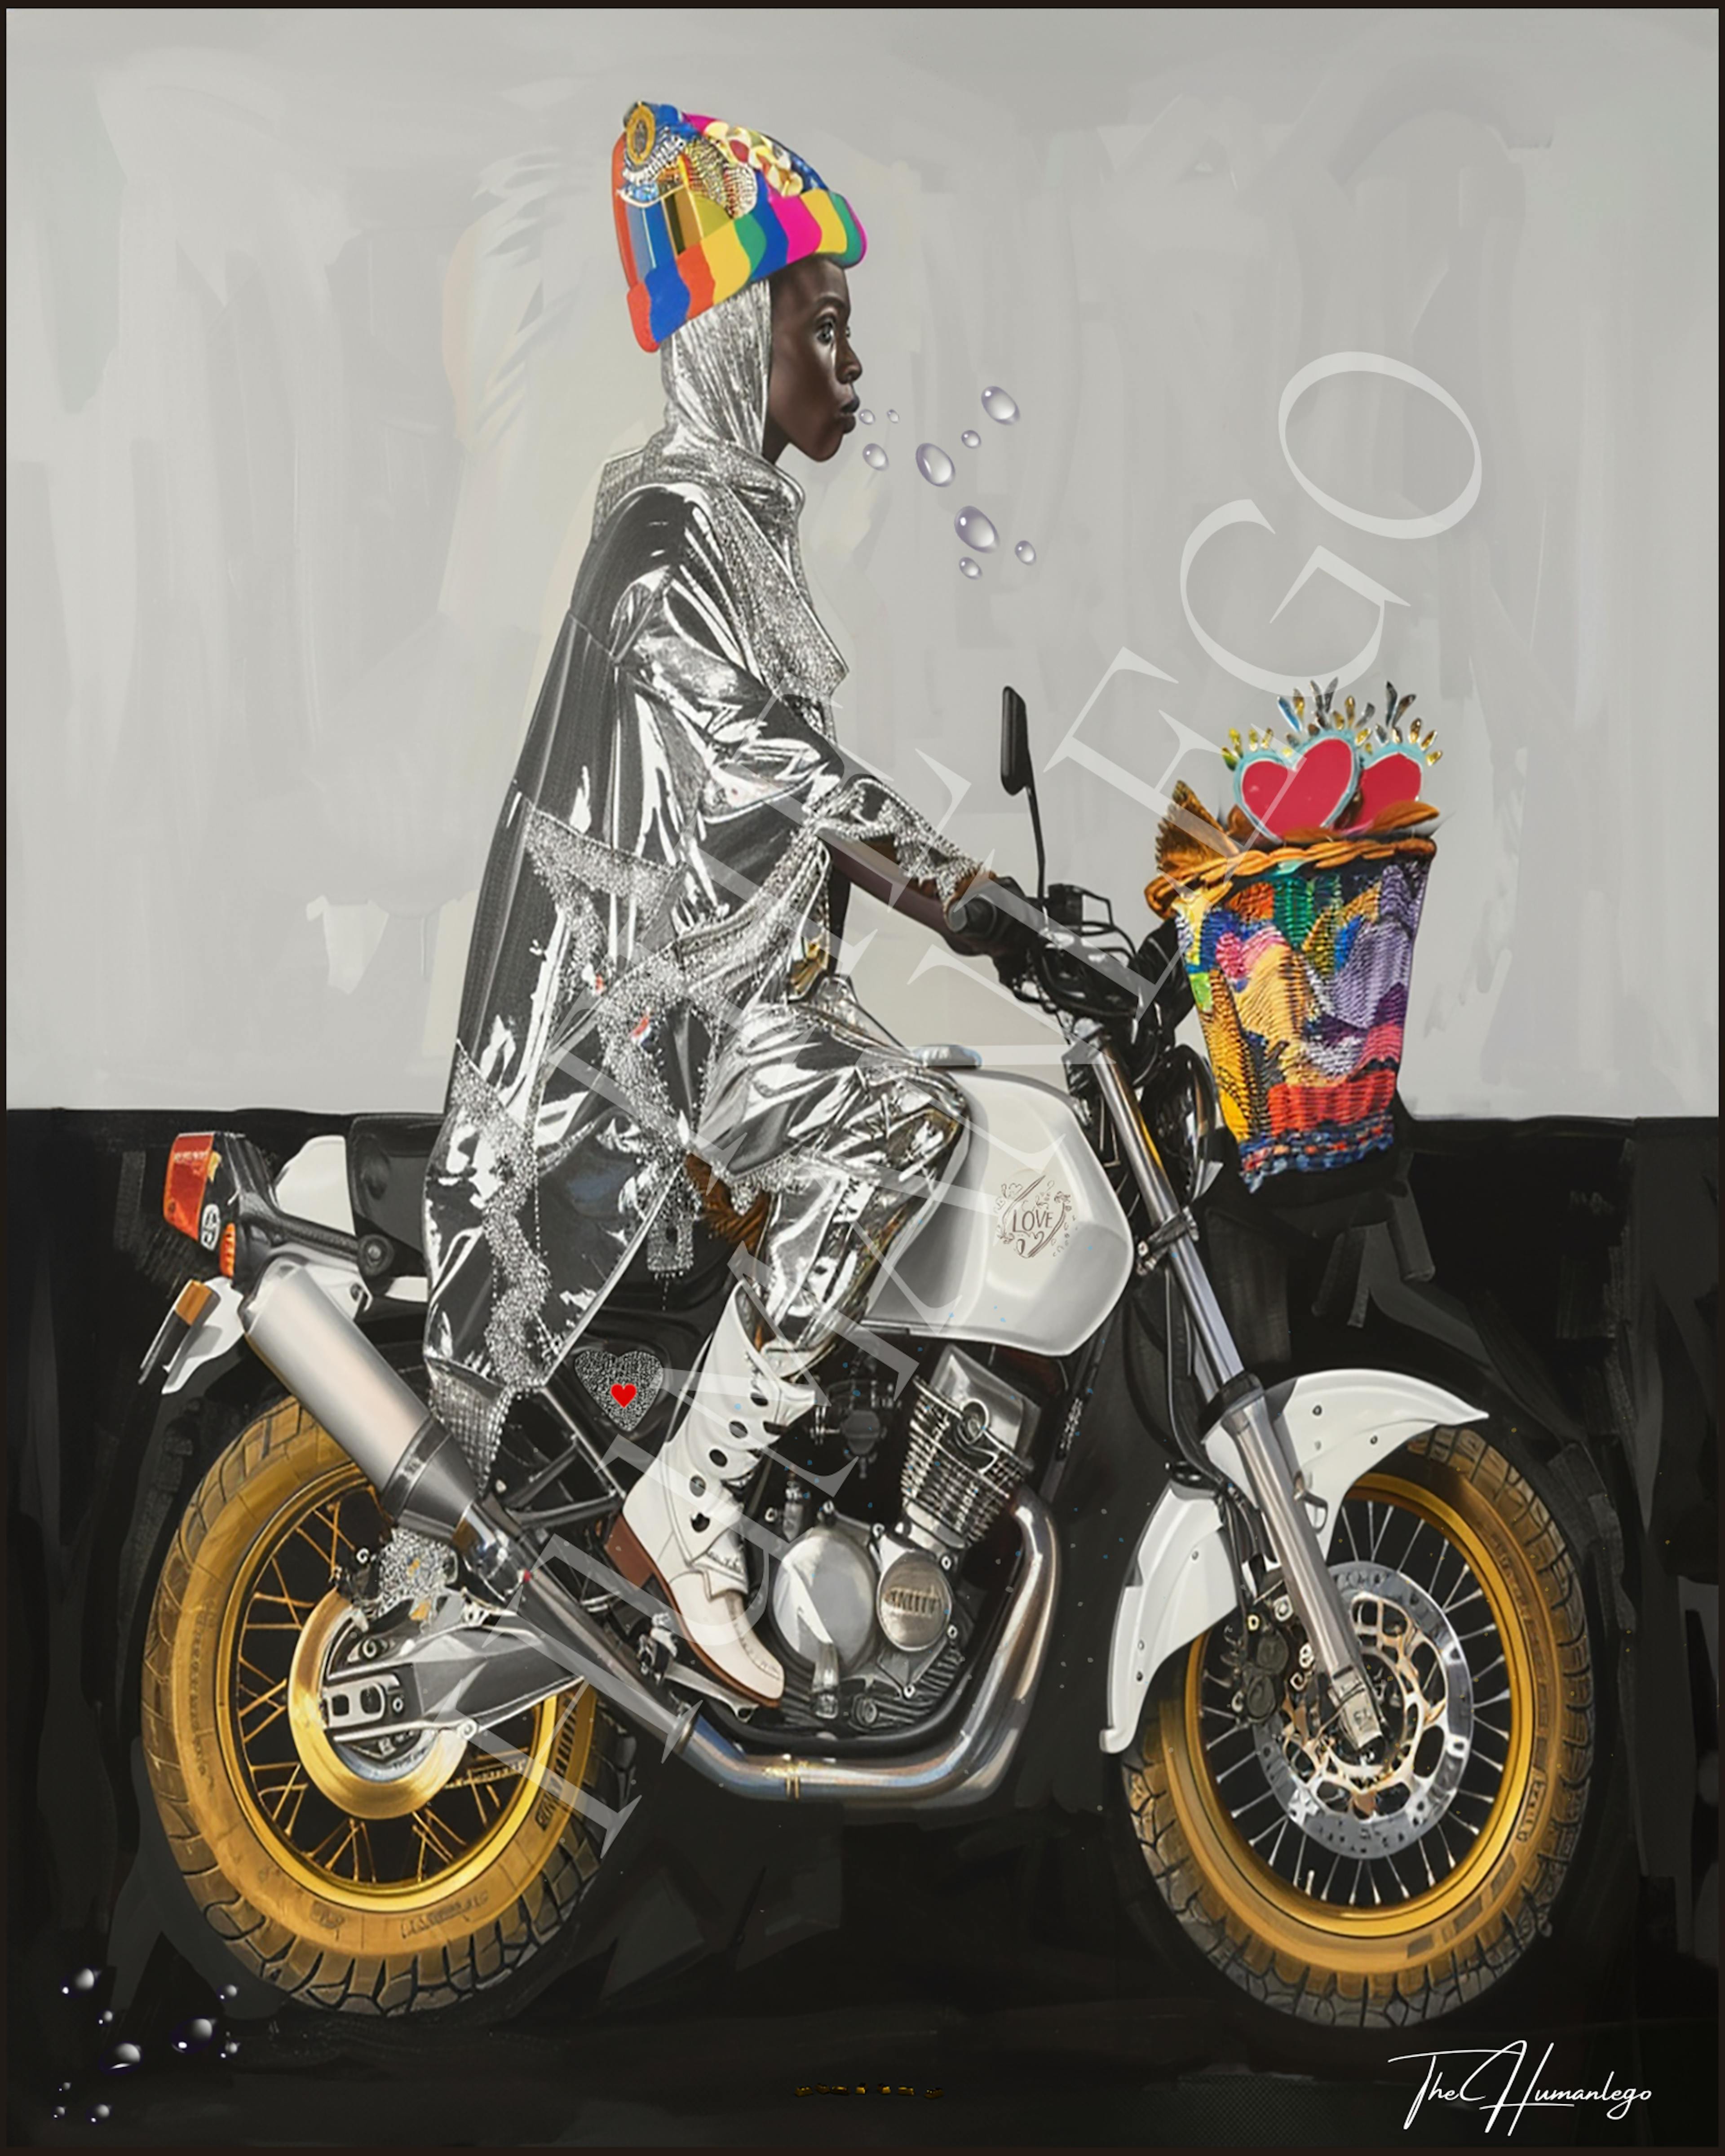 Illustration of a person on a motorcycle